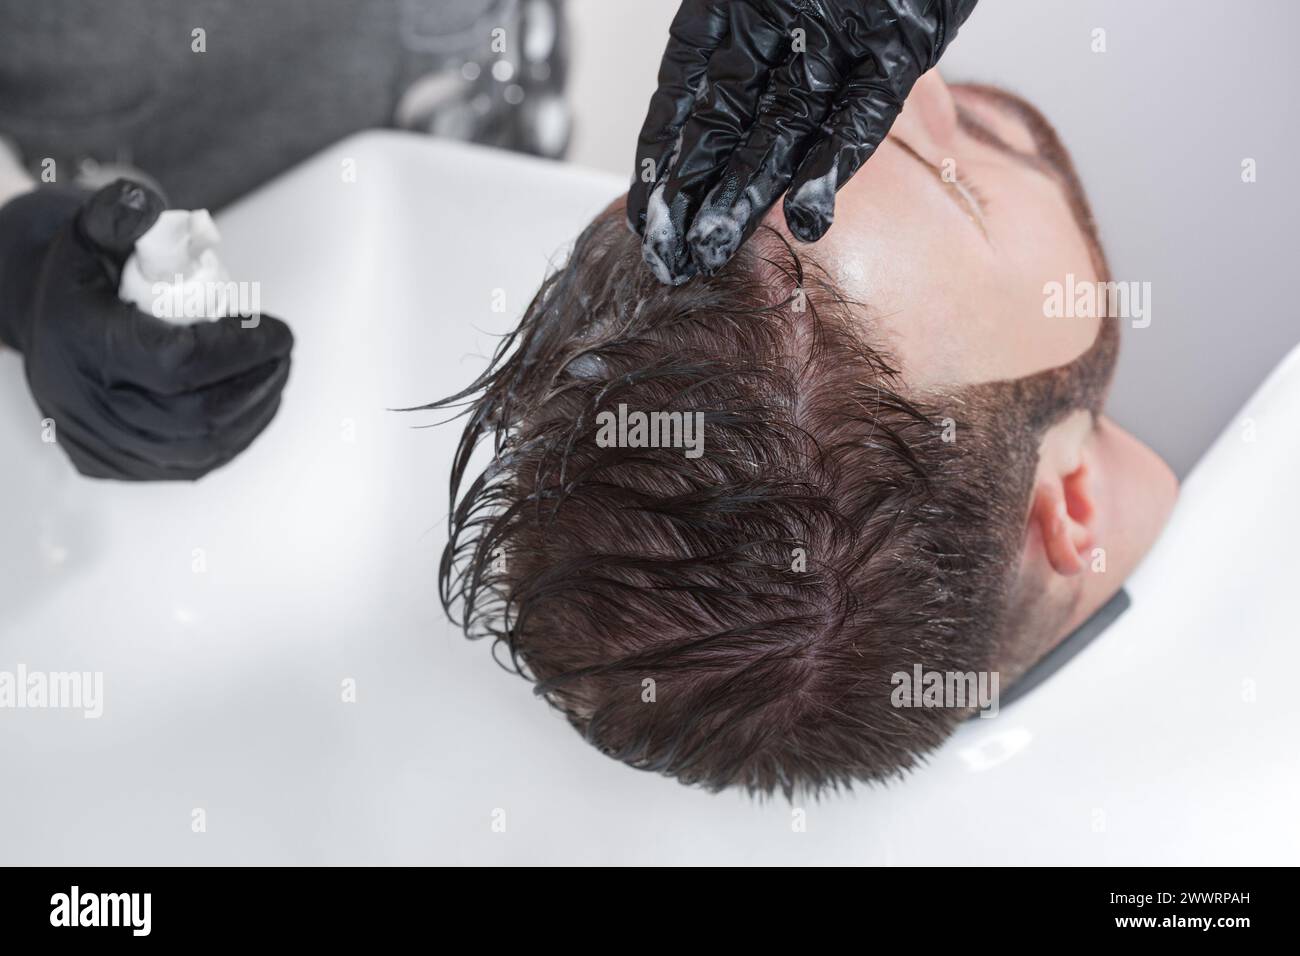 The hairdresser paints hair from gray hair of a man in a barbershop. Stock Photo